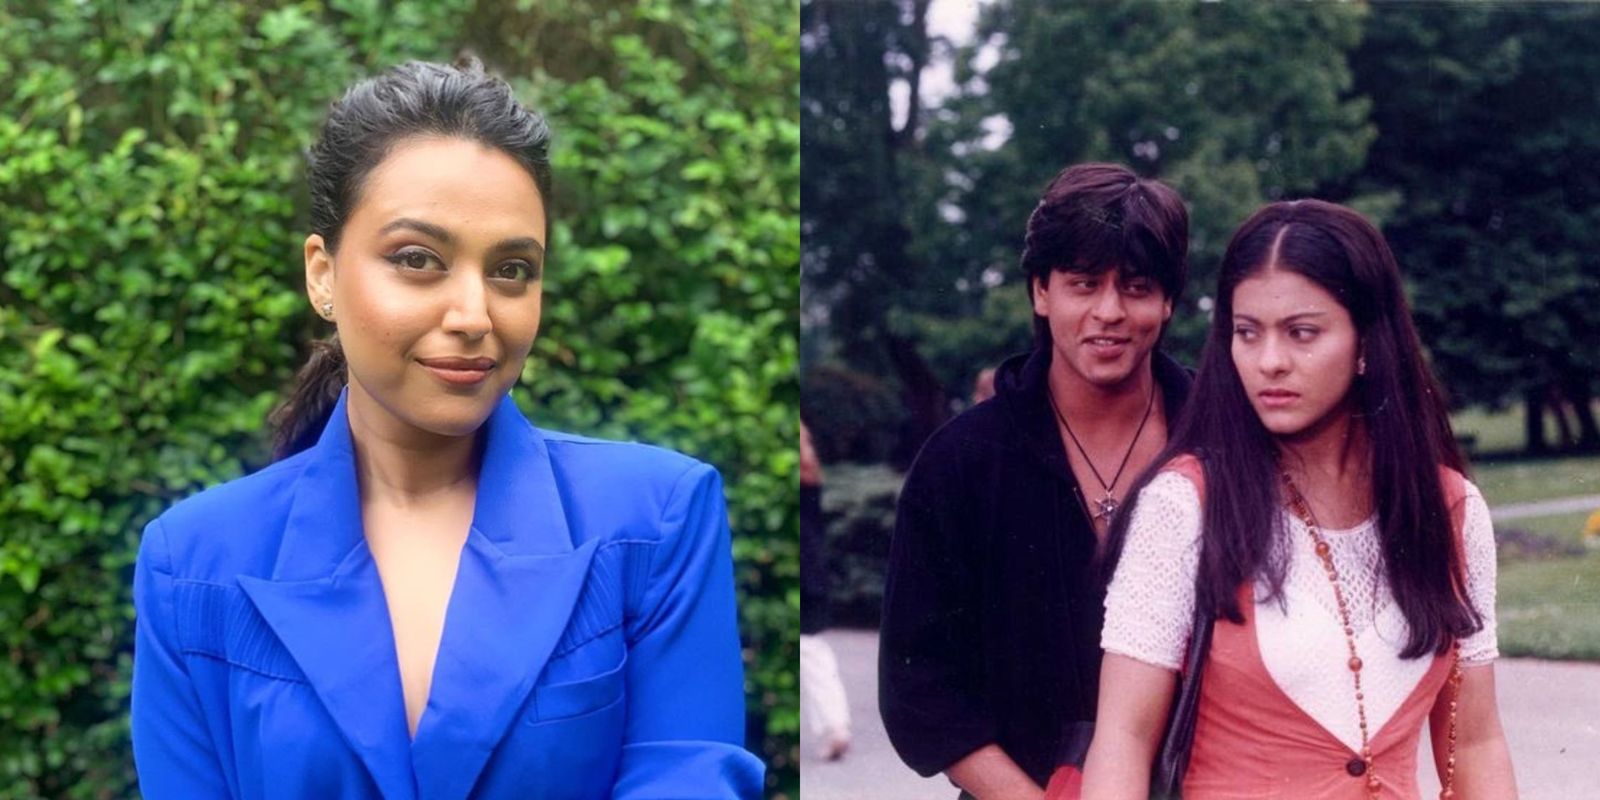 Swara Bhasker Says, 'Bollywood Makes Stalking Seem Romantic', As She Agrees With A Twitter User Calling DDLJ's Raj A Creep